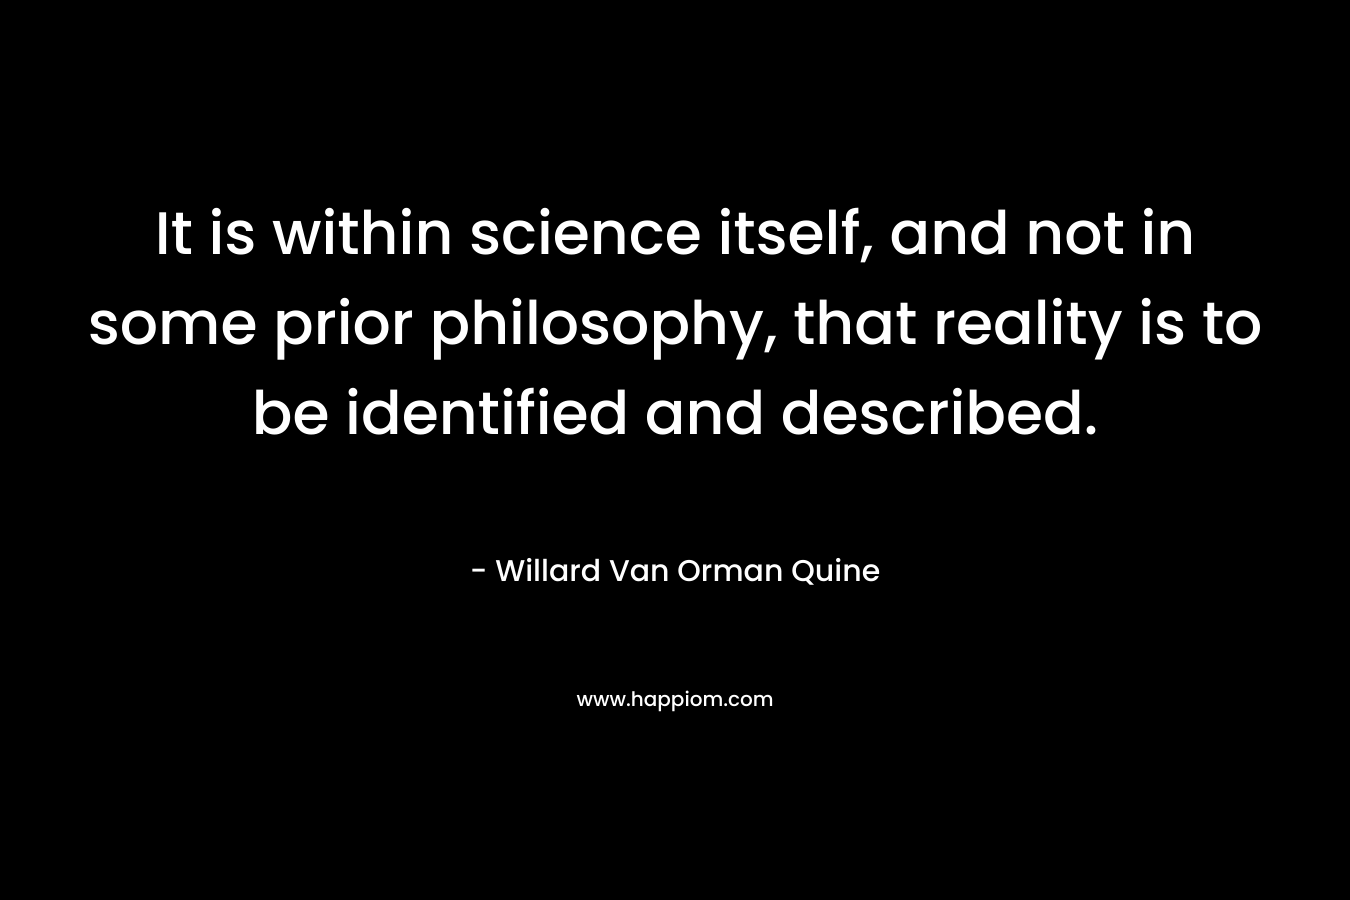 It is within science itself, and not in some prior philosophy, that reality is to be identified and described. – Willard Van Orman Quine